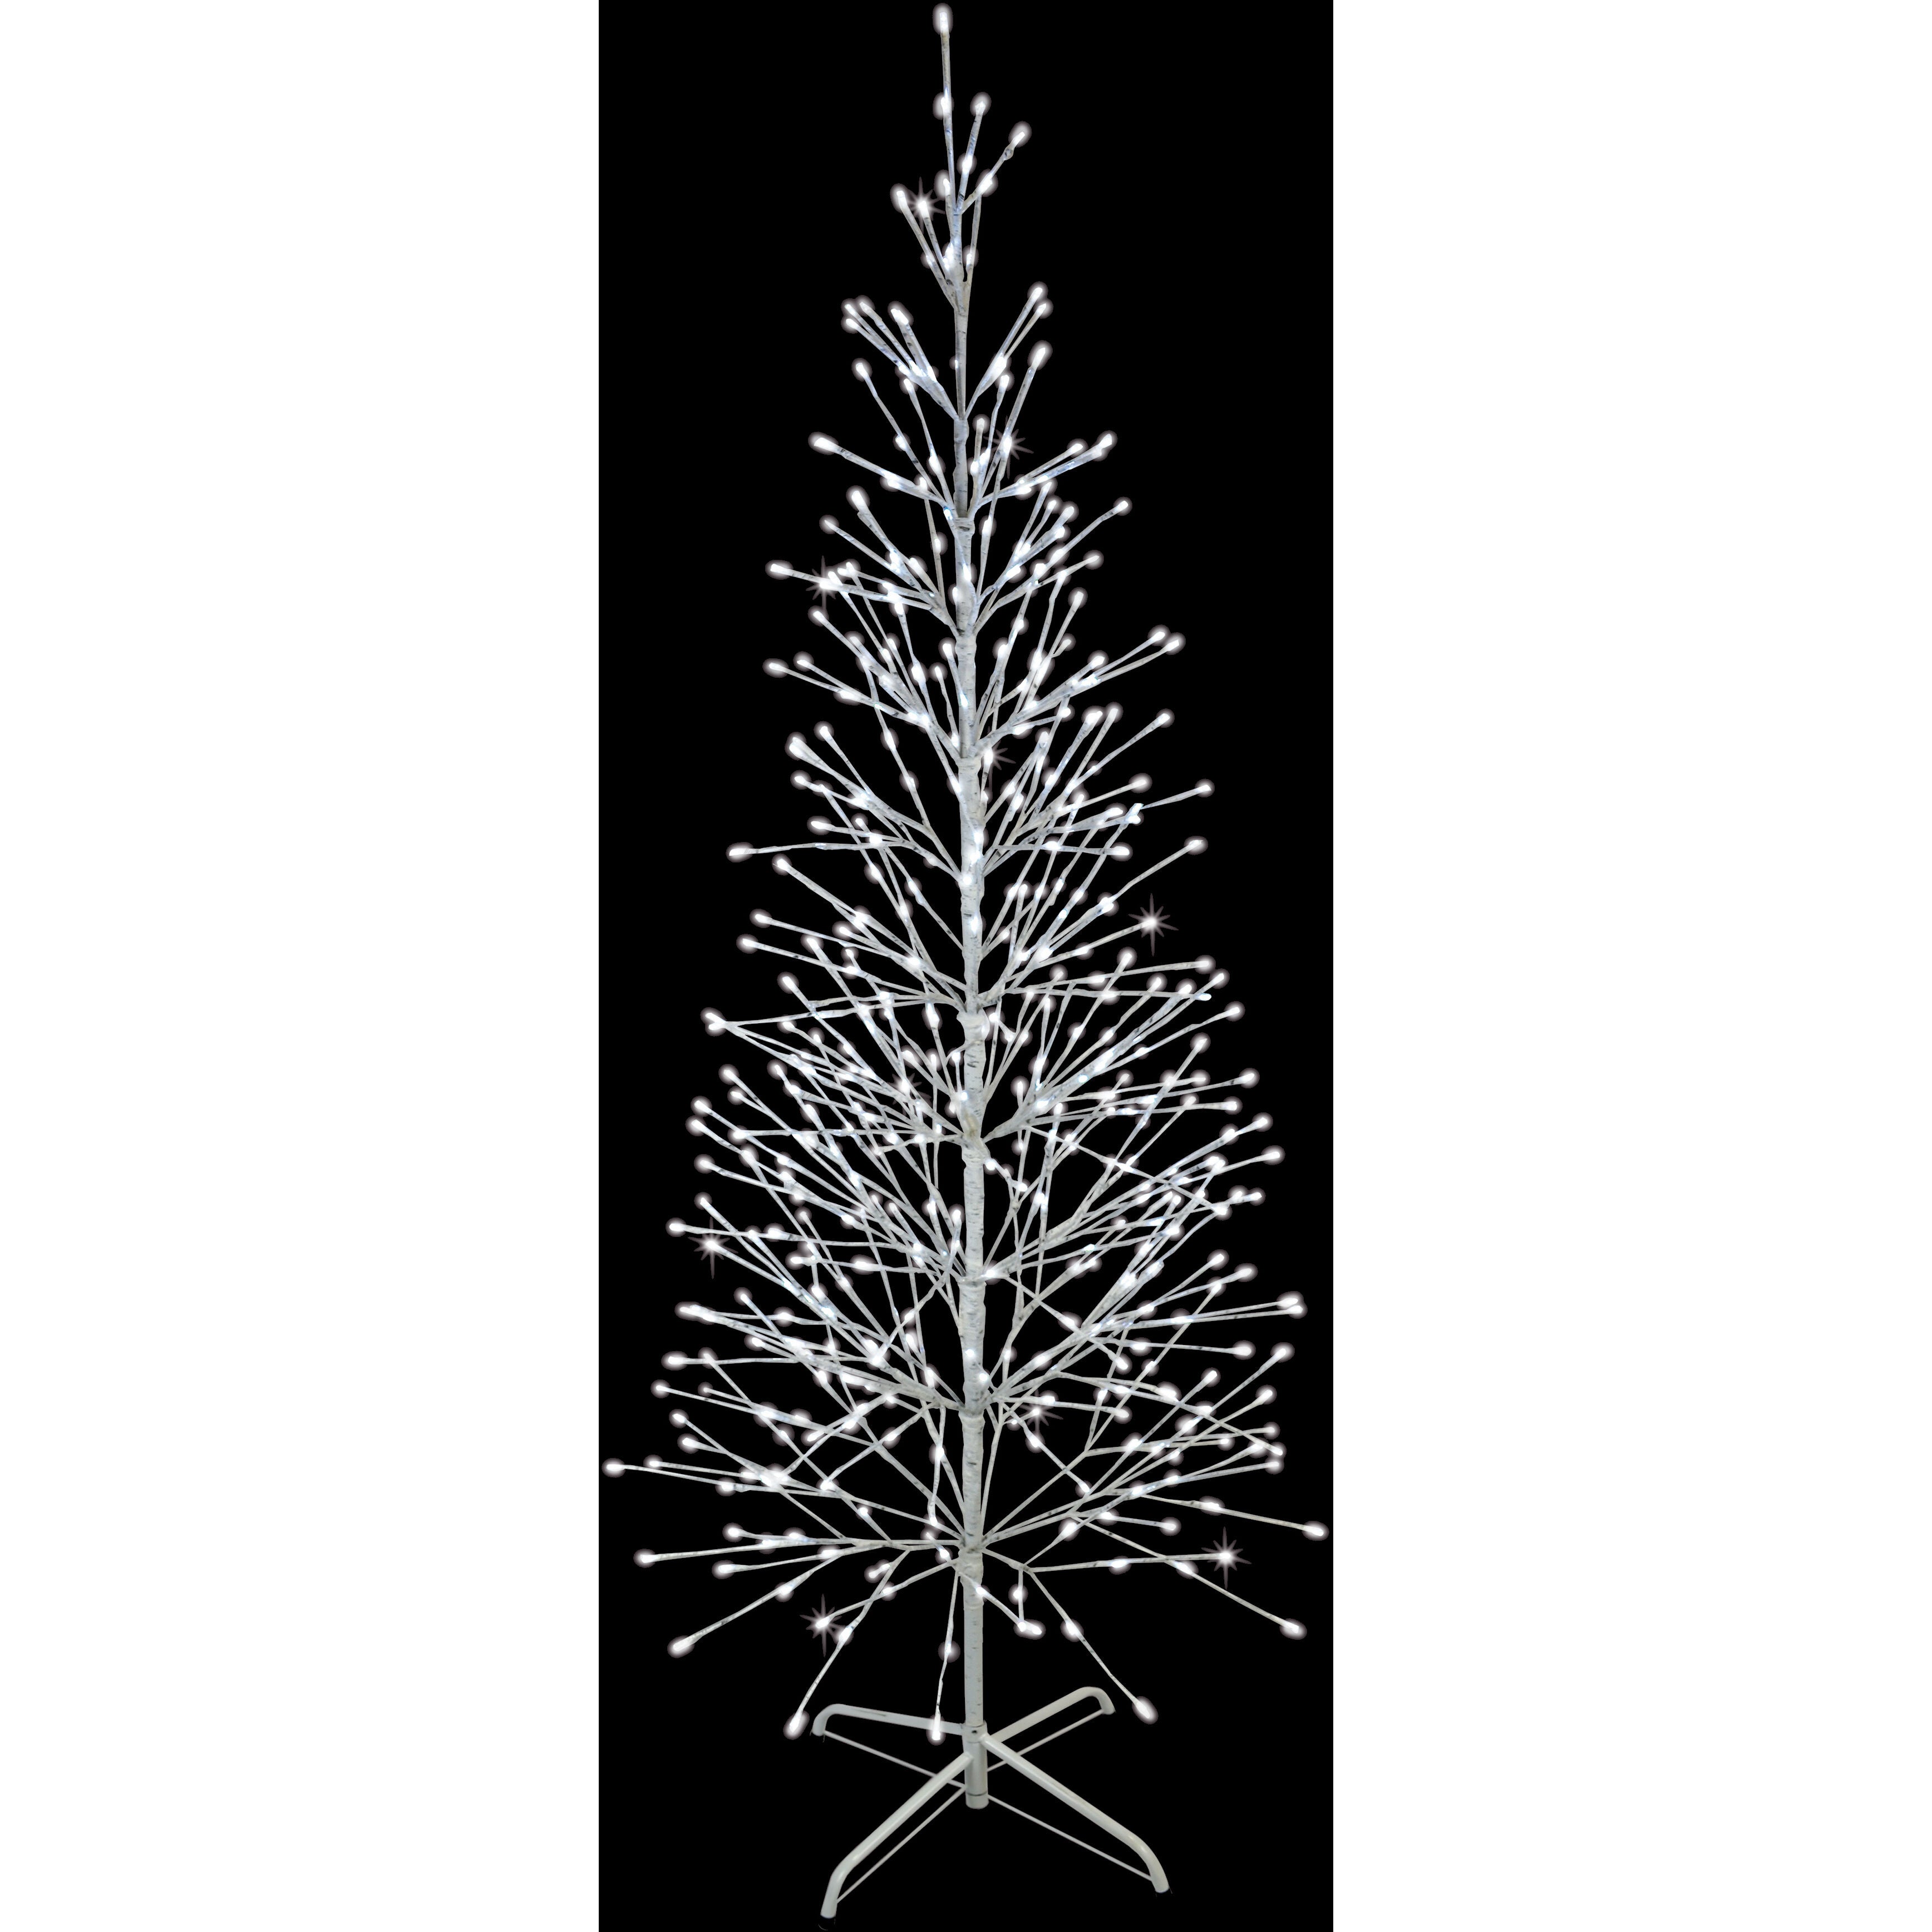 Fraser Hill Farm -  Set of 3 Color Changing Birch Trees, 4-Ft., 5.5-Ft., 6.5-Ft., in Warm White and Multi-Color LED Lights